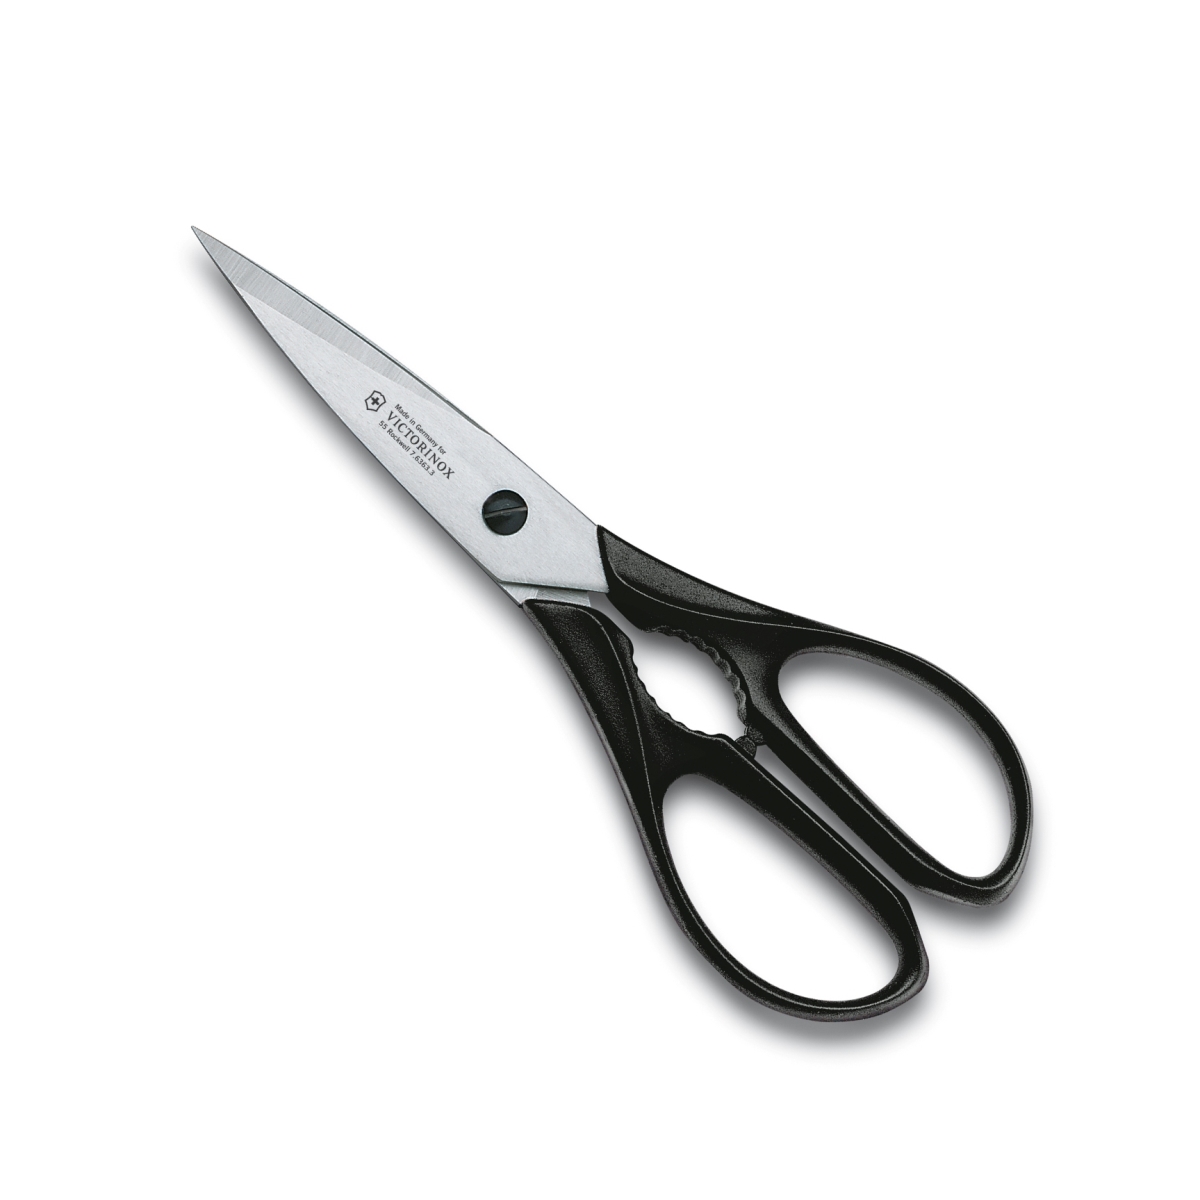 Swiss Arms Swiss Army Brands VIC-87771 2019 4 in. Victorinox Kitchen Blackshears with Bottle Opener Utility